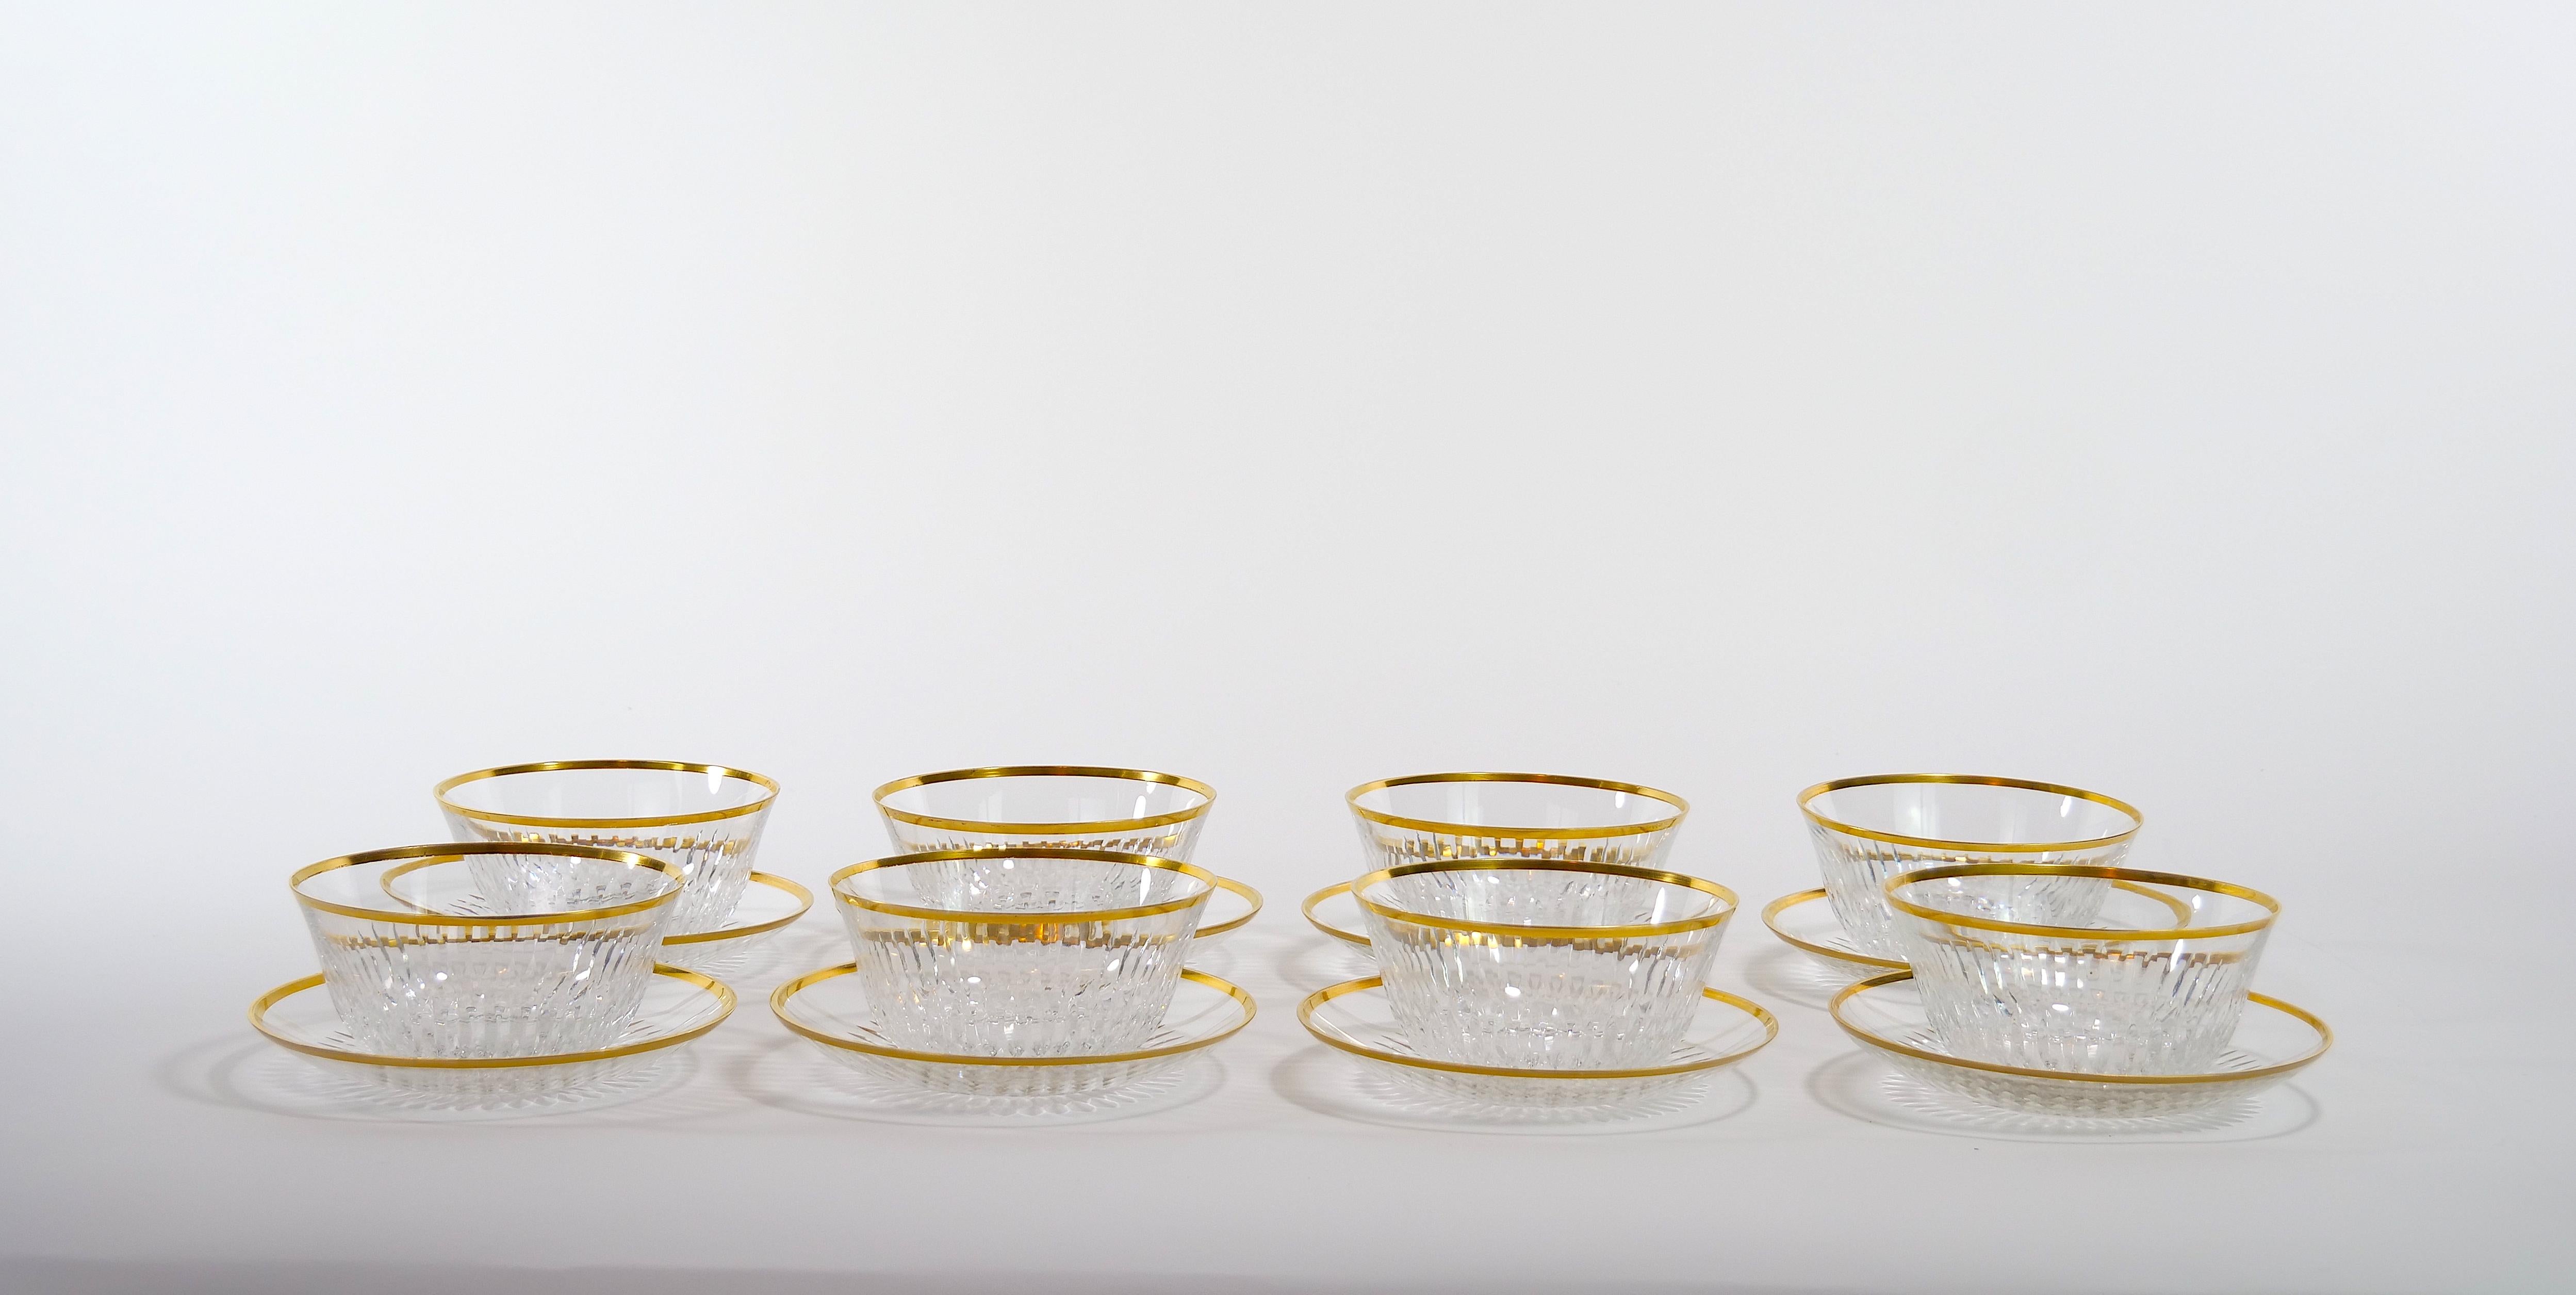 Beautiful and richly hand cut and hand painted gilt gold trim serving bowl and saucer tableware service for 8 people. Each bowl features a deep cuts that allow the light to retract and shine to a brilliant finish from any angle. Hand cut & gilt by